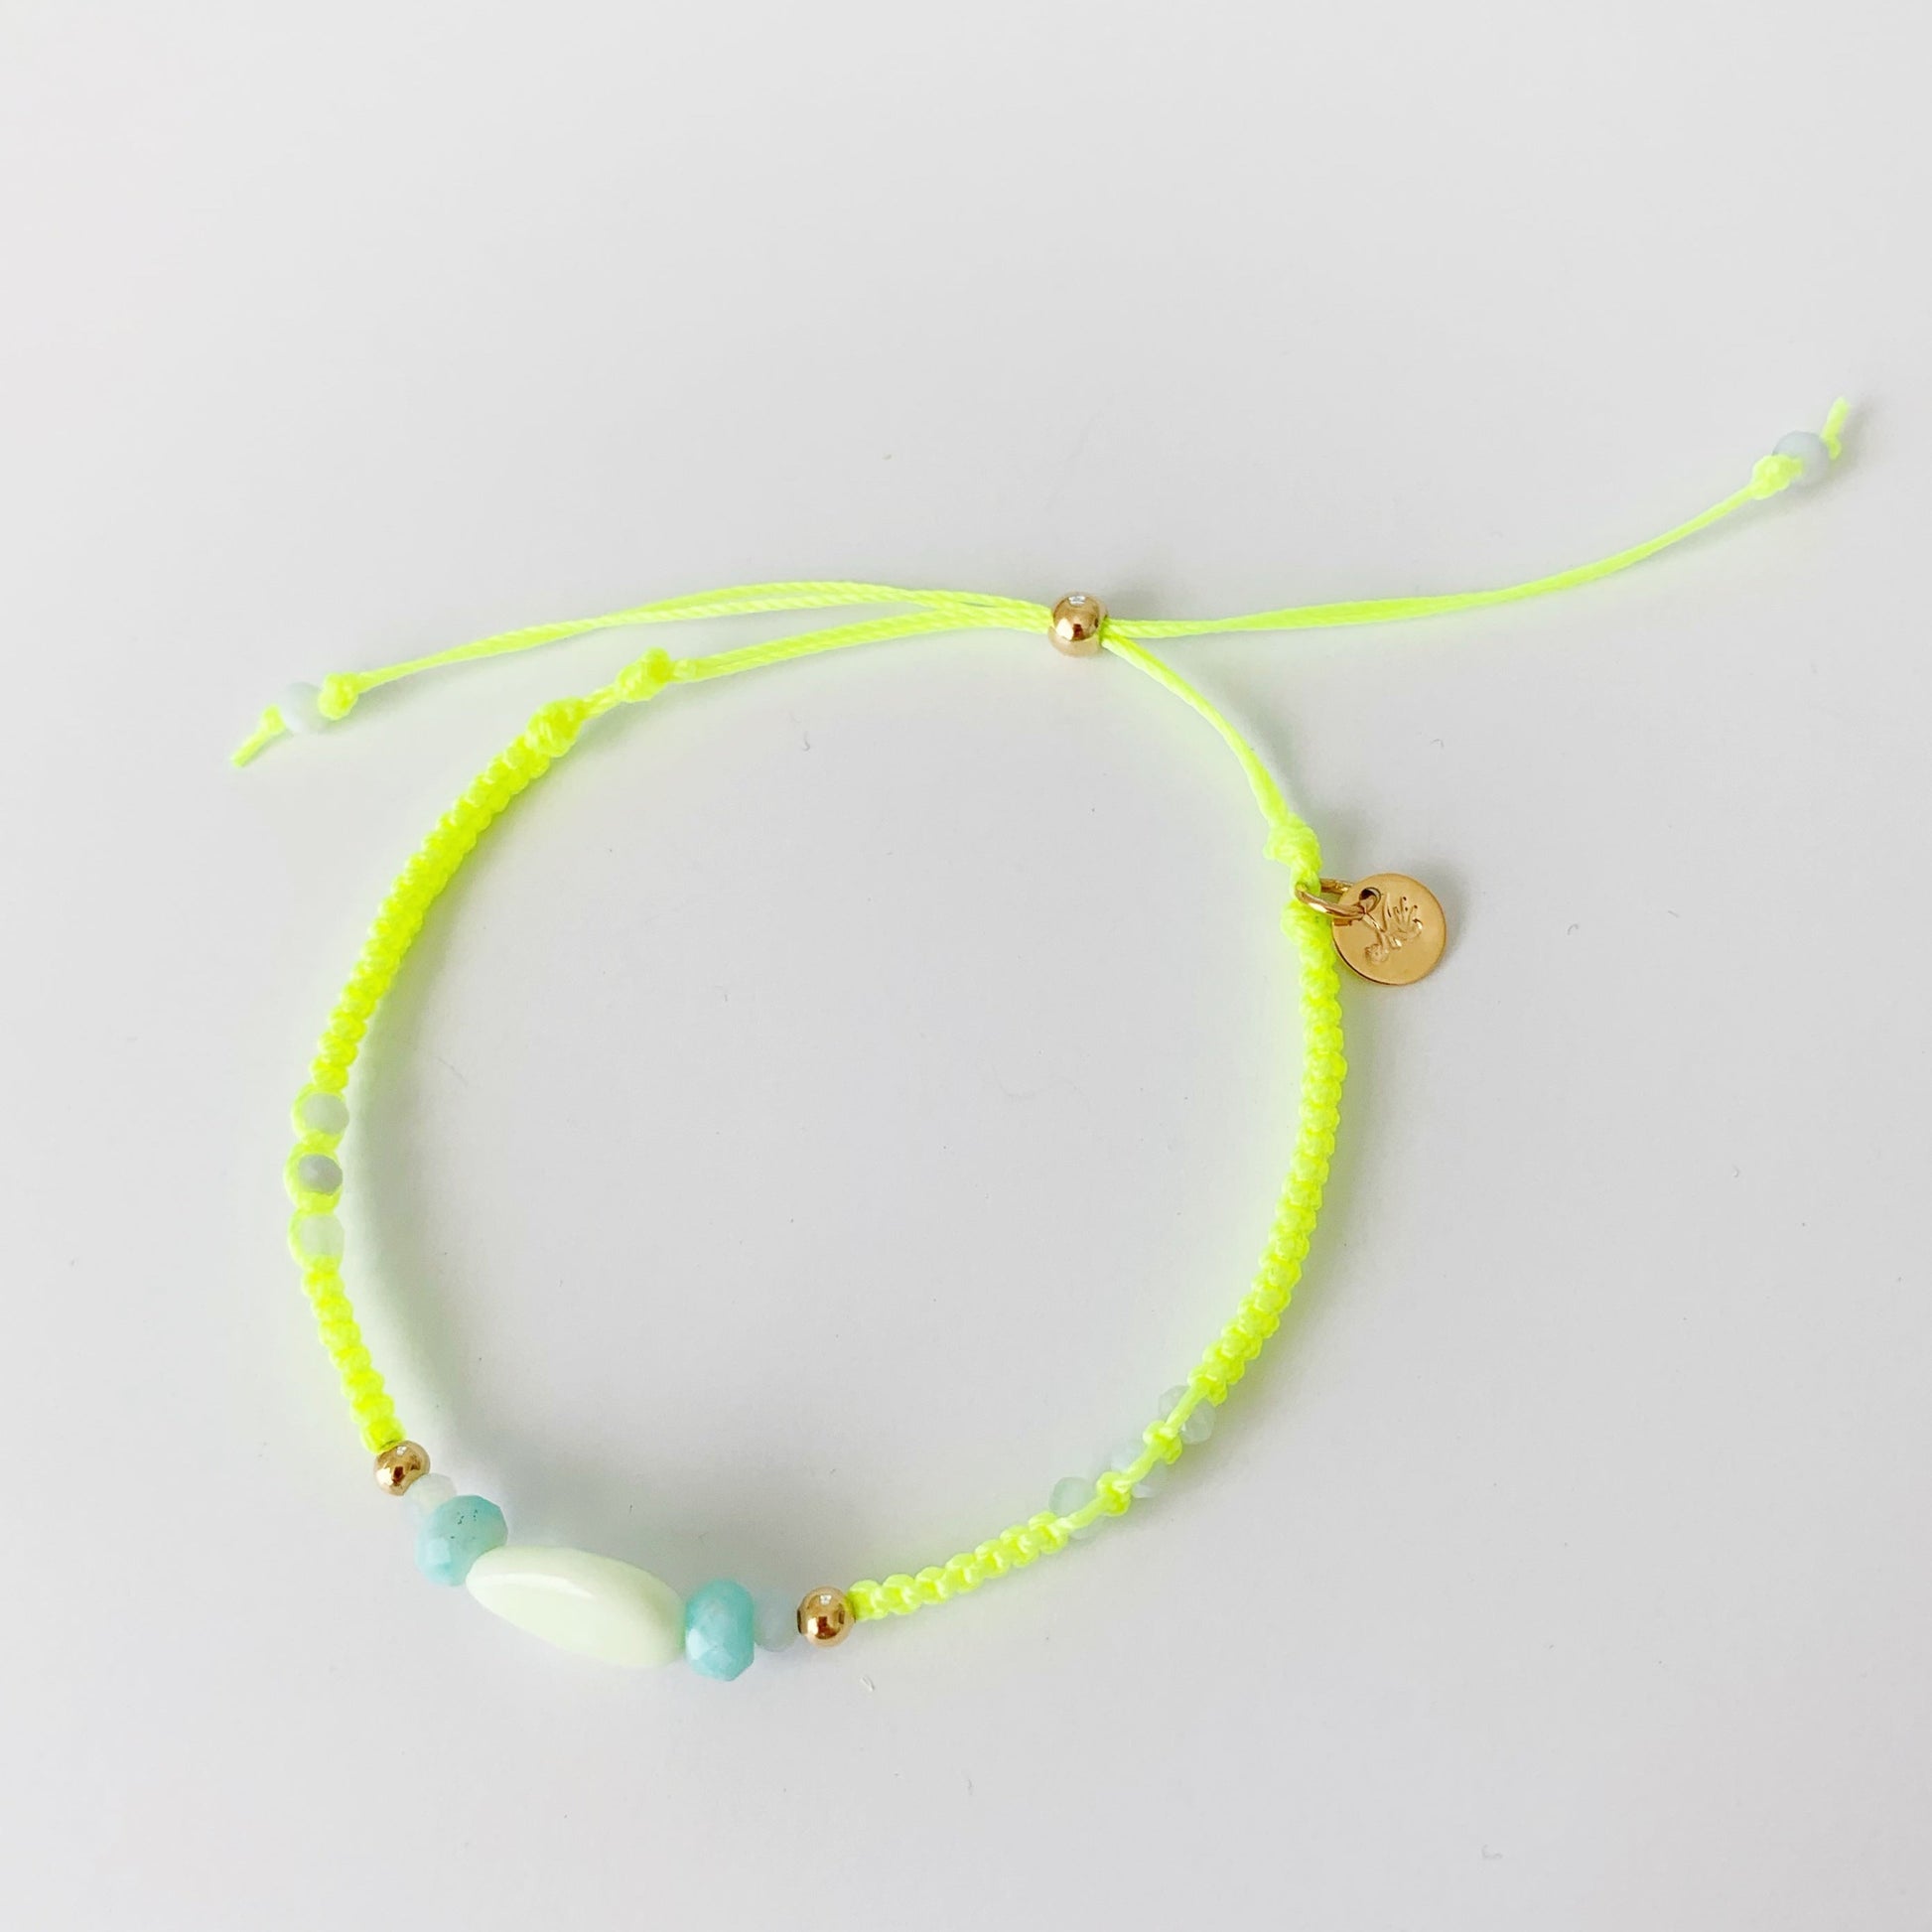 a top view of the neon yellow macrame friendship bracelet by mermaids and madeleines pictured on a white surface